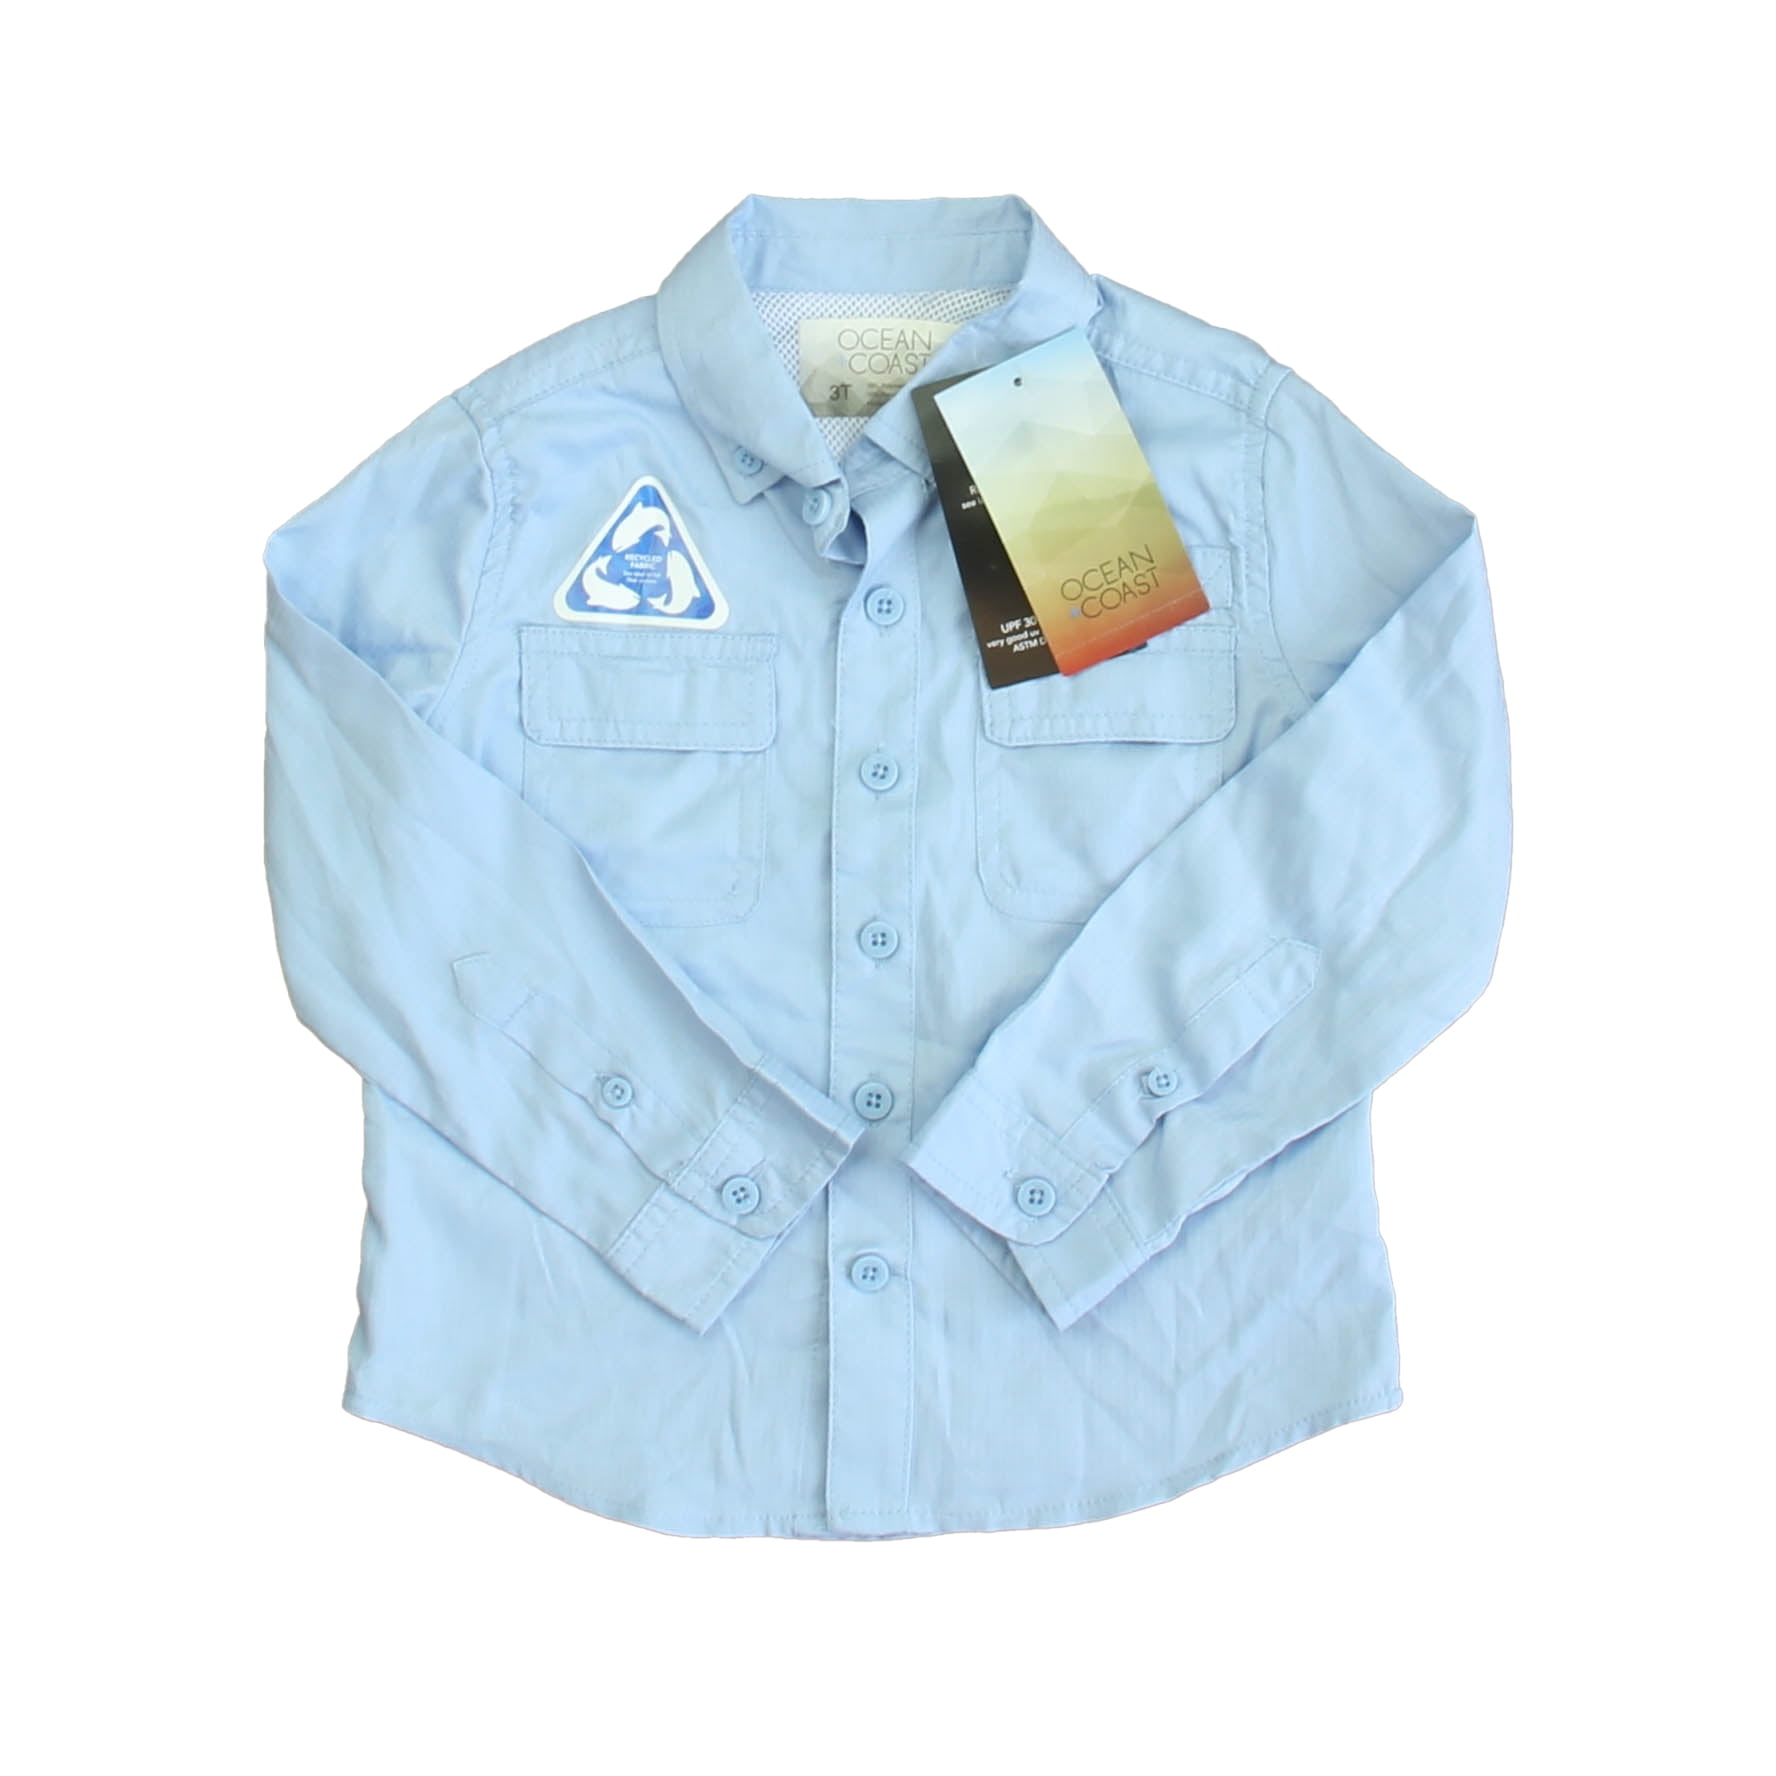 Pre-owned Ocean + Coast Boys Blue Button Down Long Sleeve size: 3T